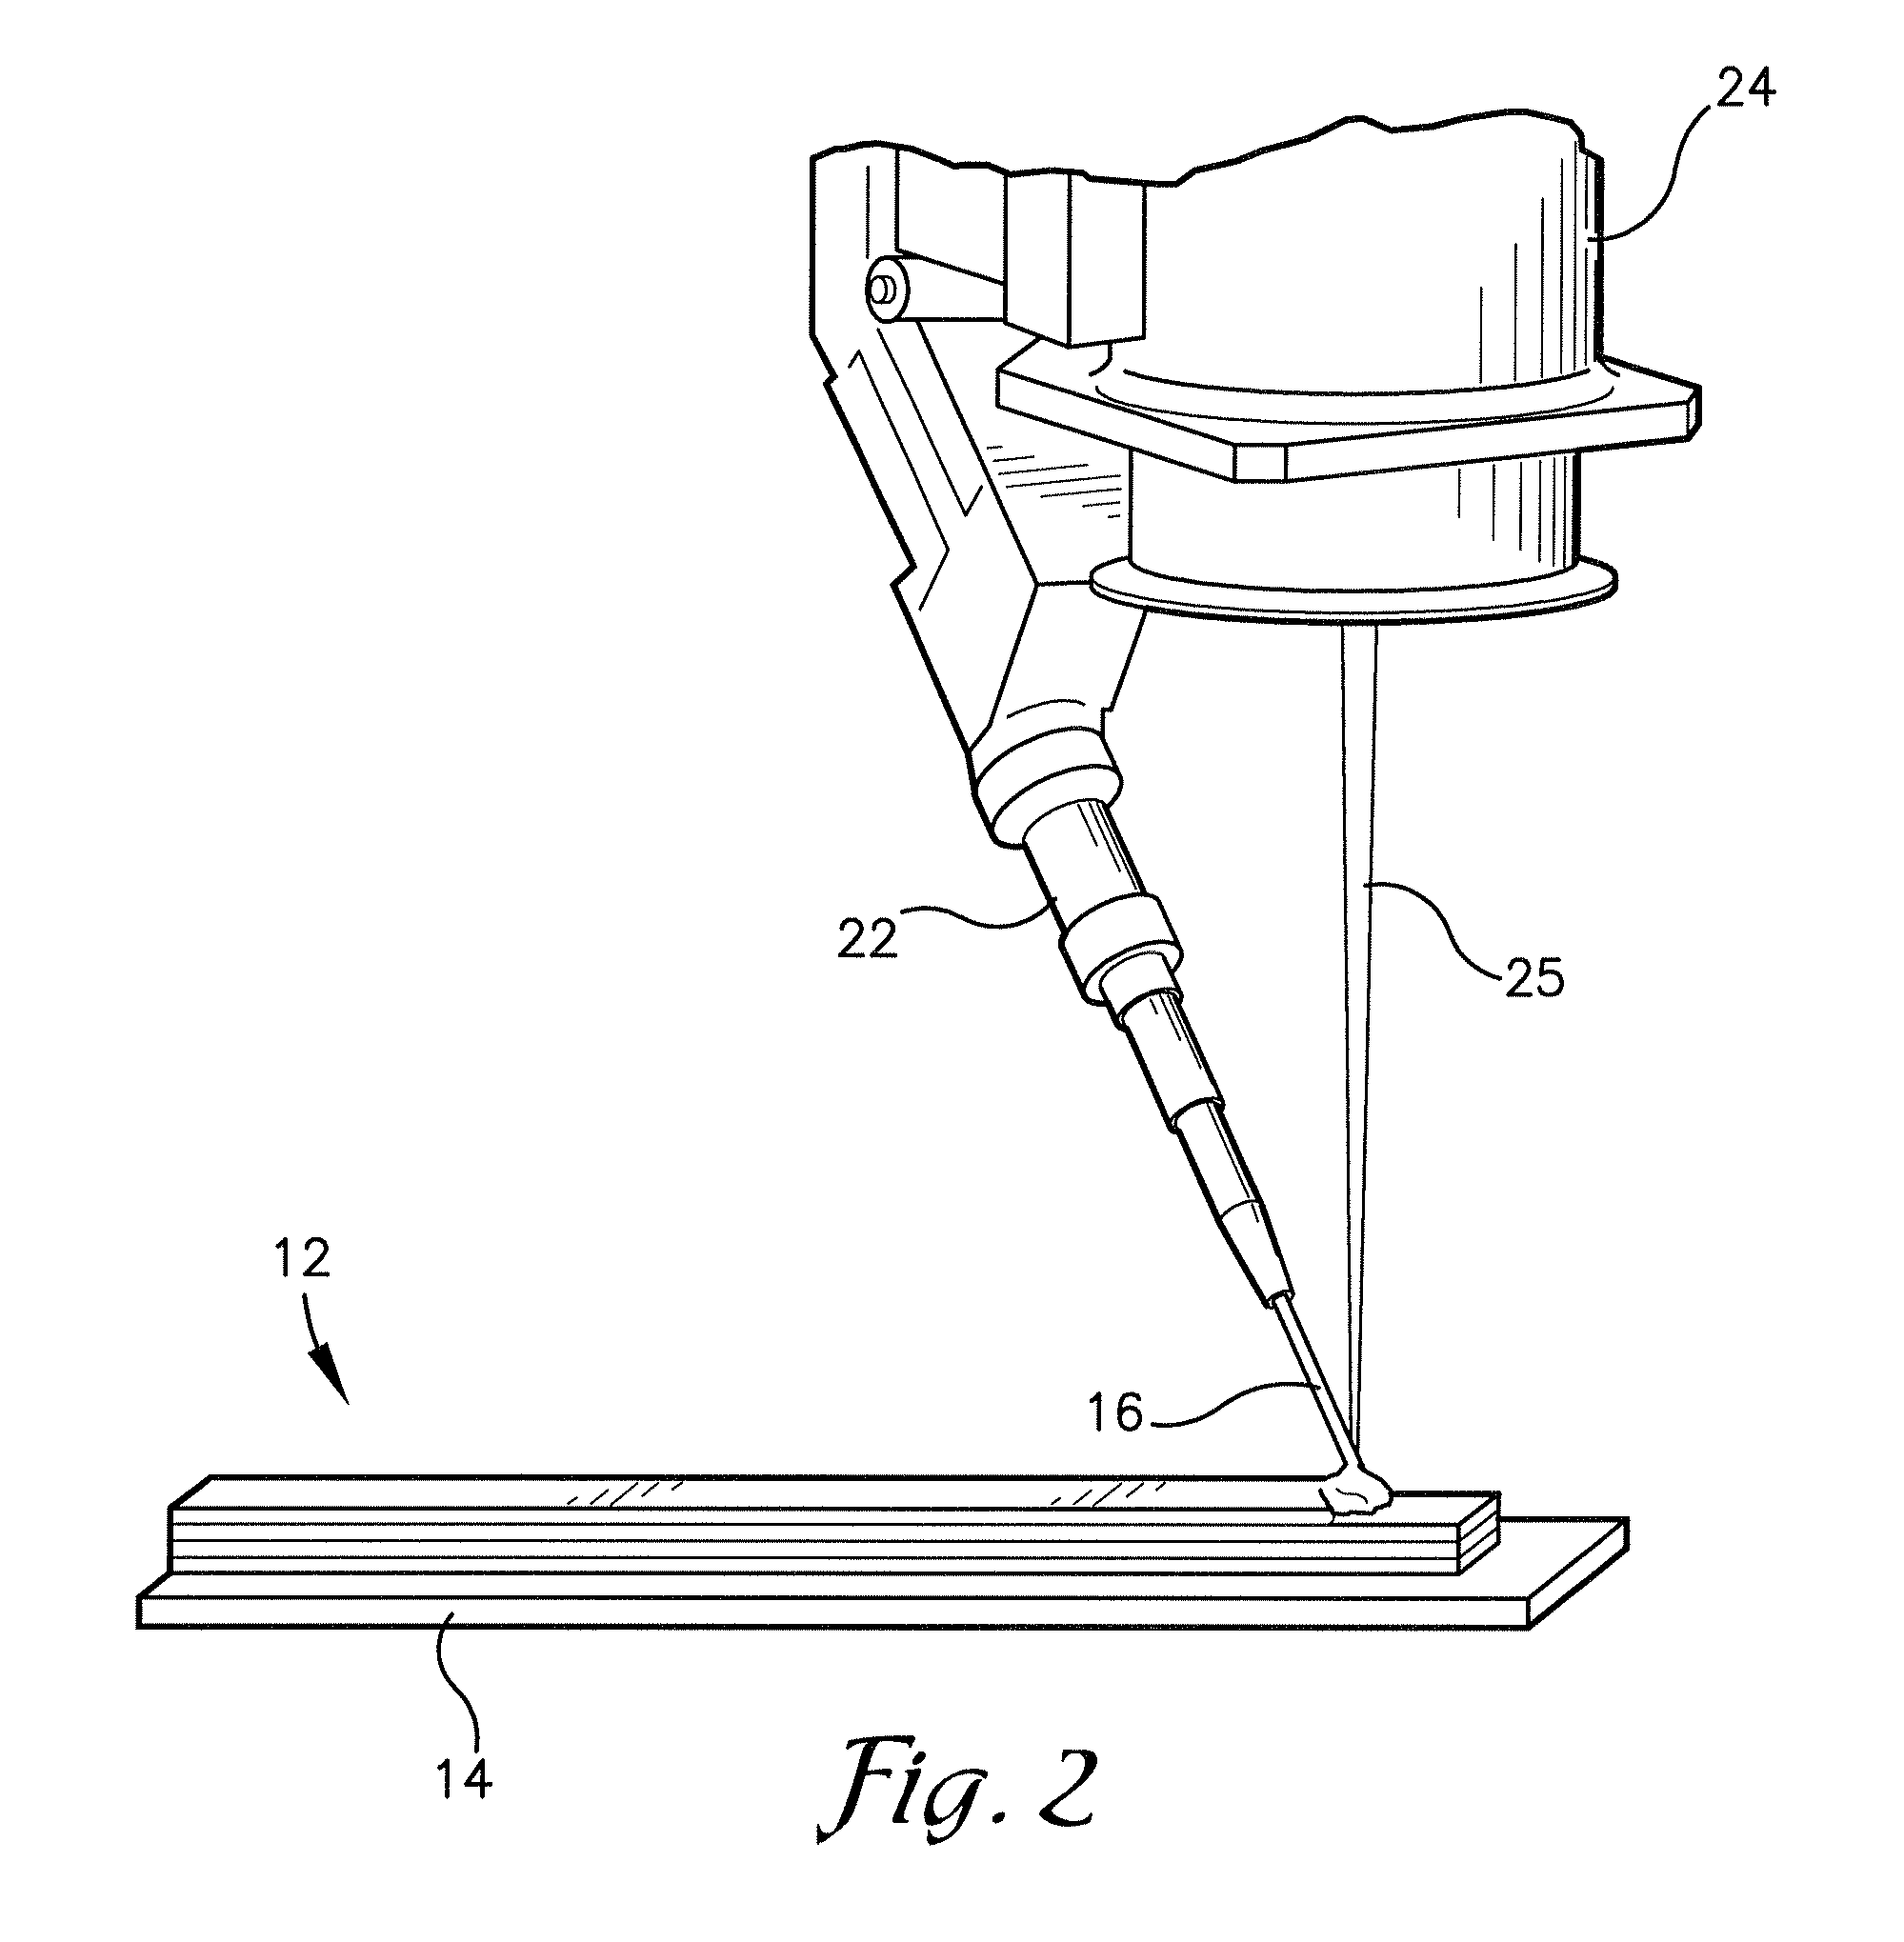 System and method to form and heat-treat a metal part